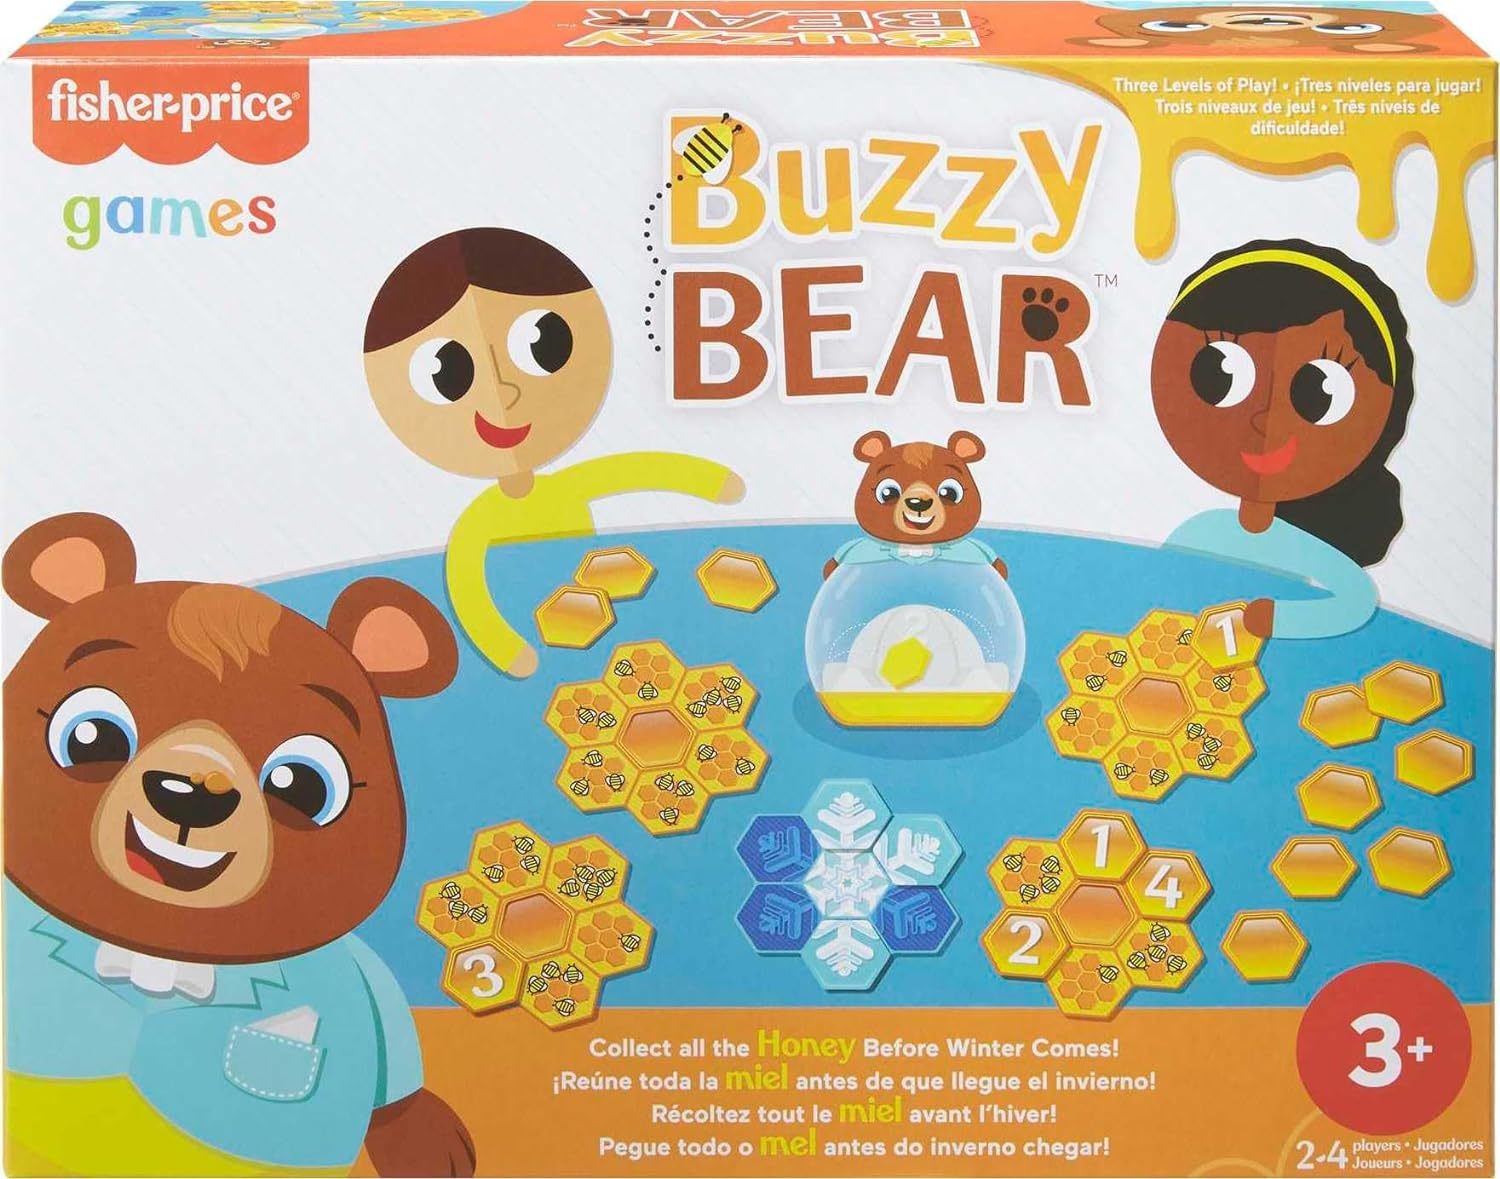 Buzzy Bear Cooperative Kids Game for 2 to 4 Players 3 Years Old Up with 3 Levels - $23.50